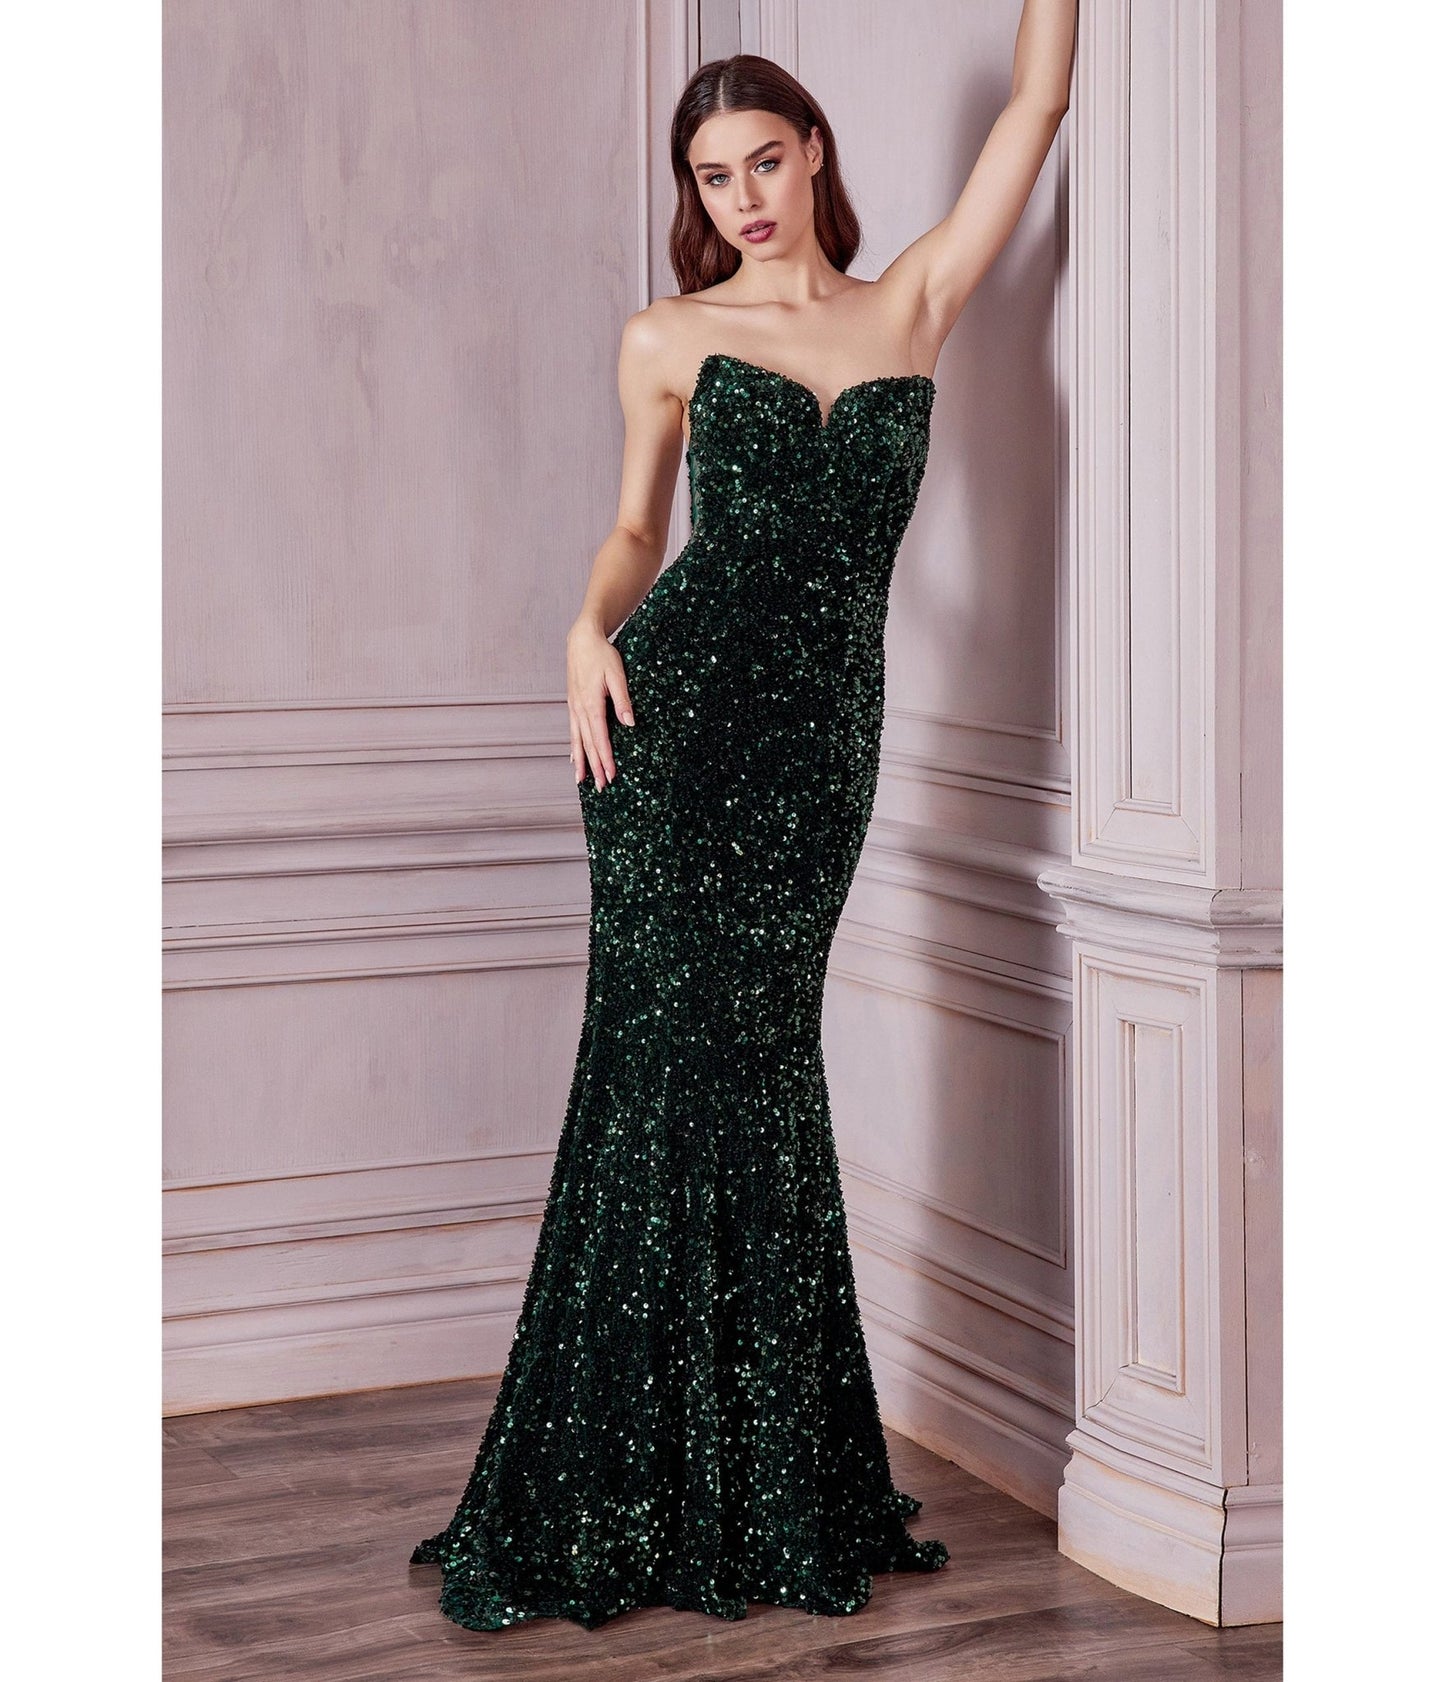 Retro & Vintage Show Stopping Emerald Strapless Sequin Prom Gown ...